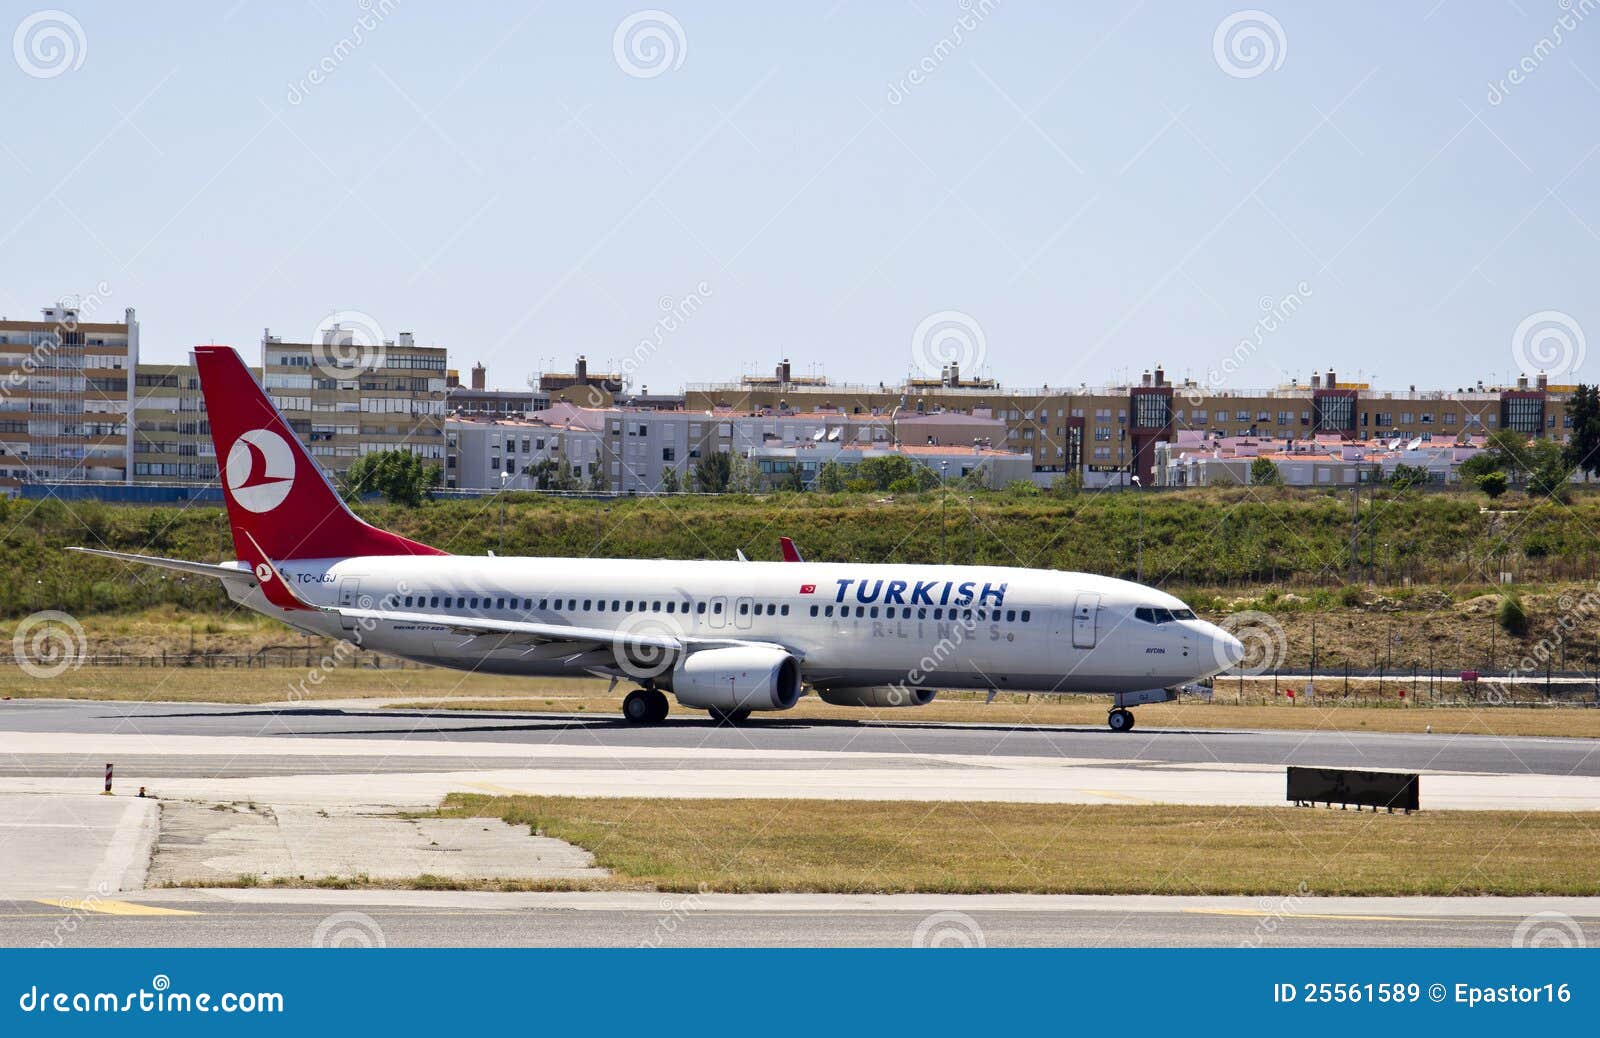 TURKISH, Boeing 737-800. OPORTO, PORTUGAL - JULY 1: Turkish Airlines resumes its service to Ulaanbaatar in Mongolia after 15 years. A Turkish Airlines aircraft landing at the Francisco Sa Carneiro Airport on July 1, 2012 in Oporto, Portugal.